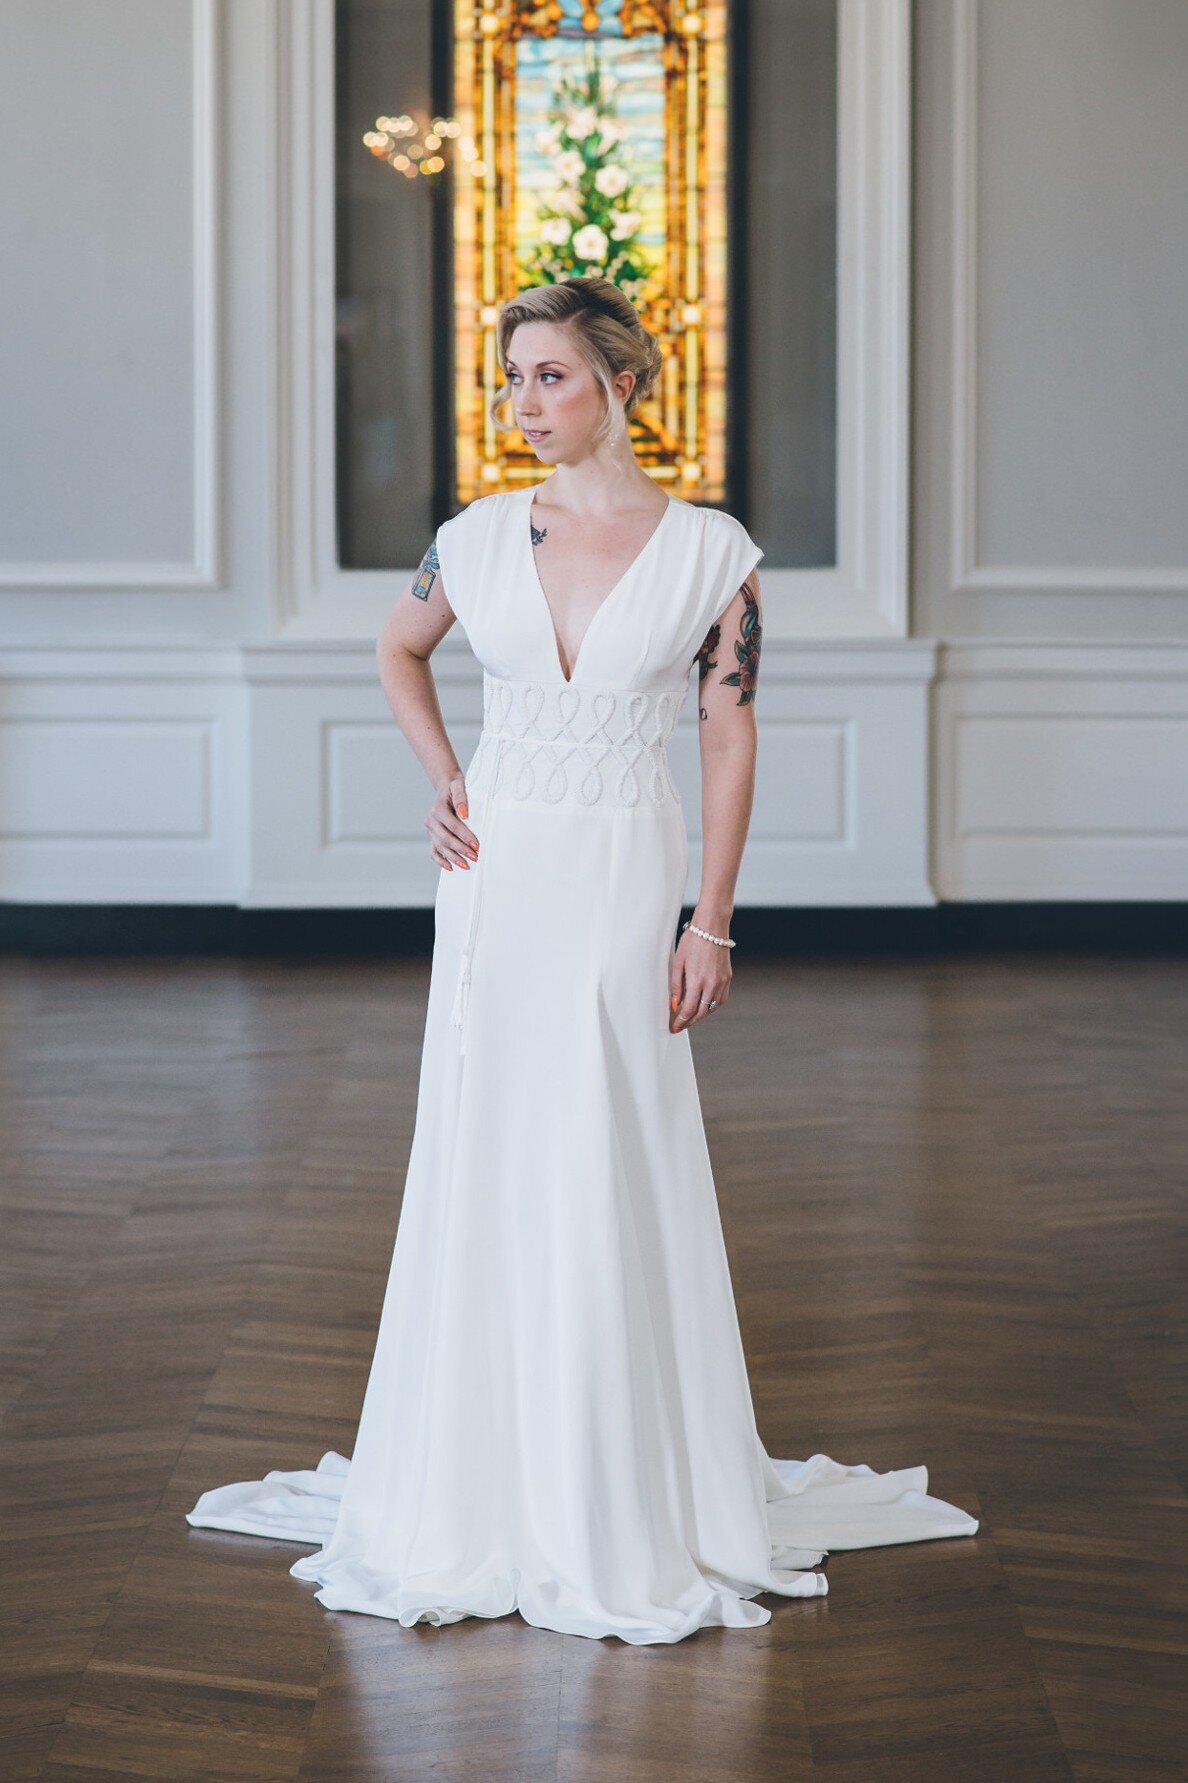 The Anila style is a sheath crepe wedding gown with a v-neck and hand-beaded waistline.